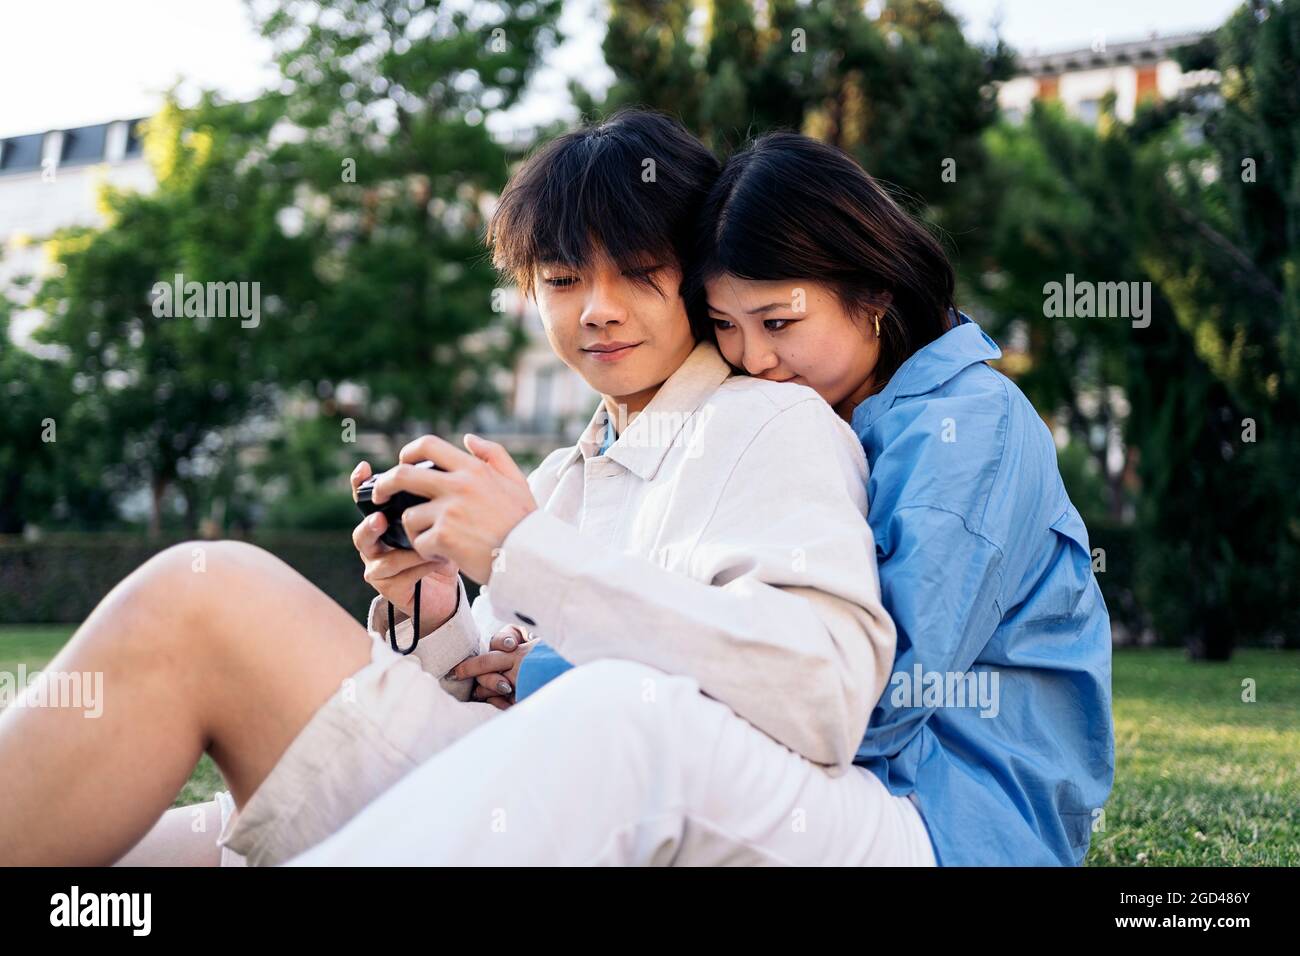 https://c8.alamy.com/comp/2GD486Y/cute-asian-couple-sitting-in-the-park-together-and-using-a-camera-2GD486Y.jpg